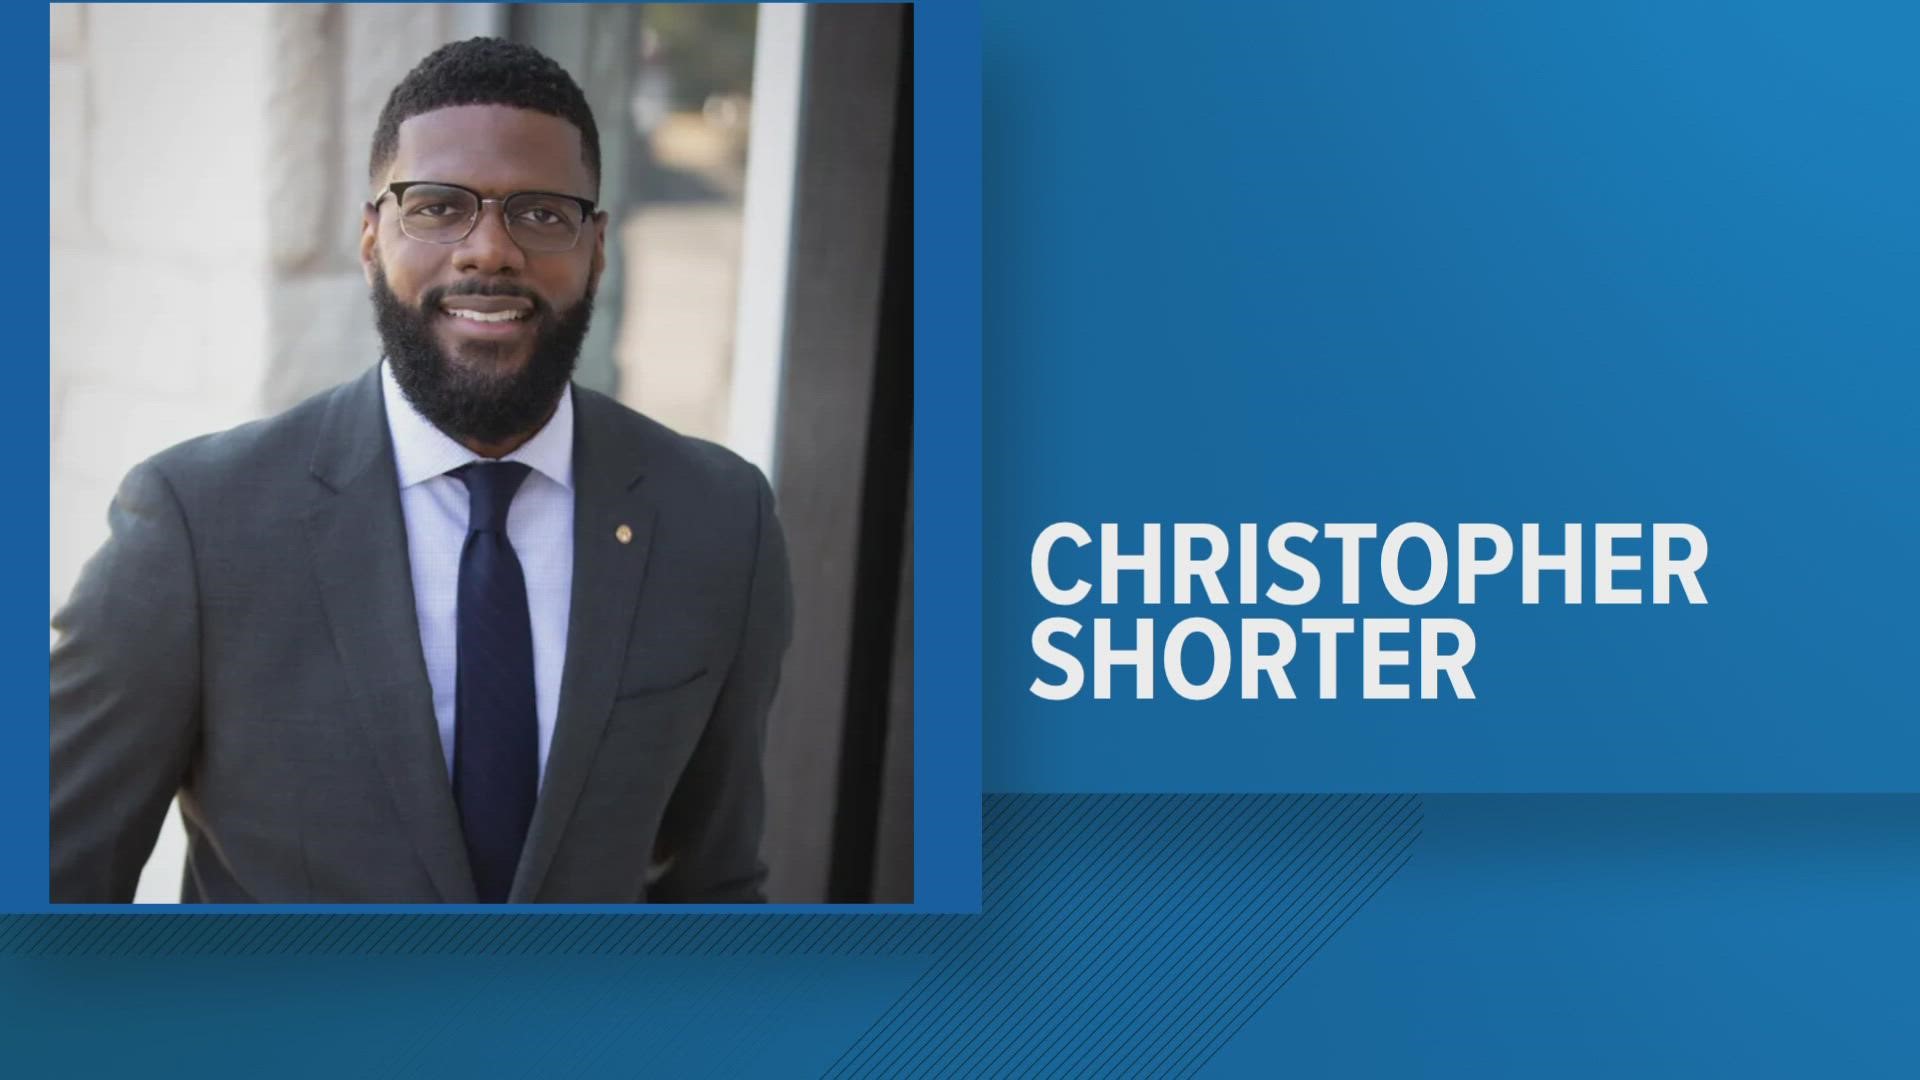 Christopher Shorter has been selected to lead the government in Prince William County starting Jan. 3, 2023.